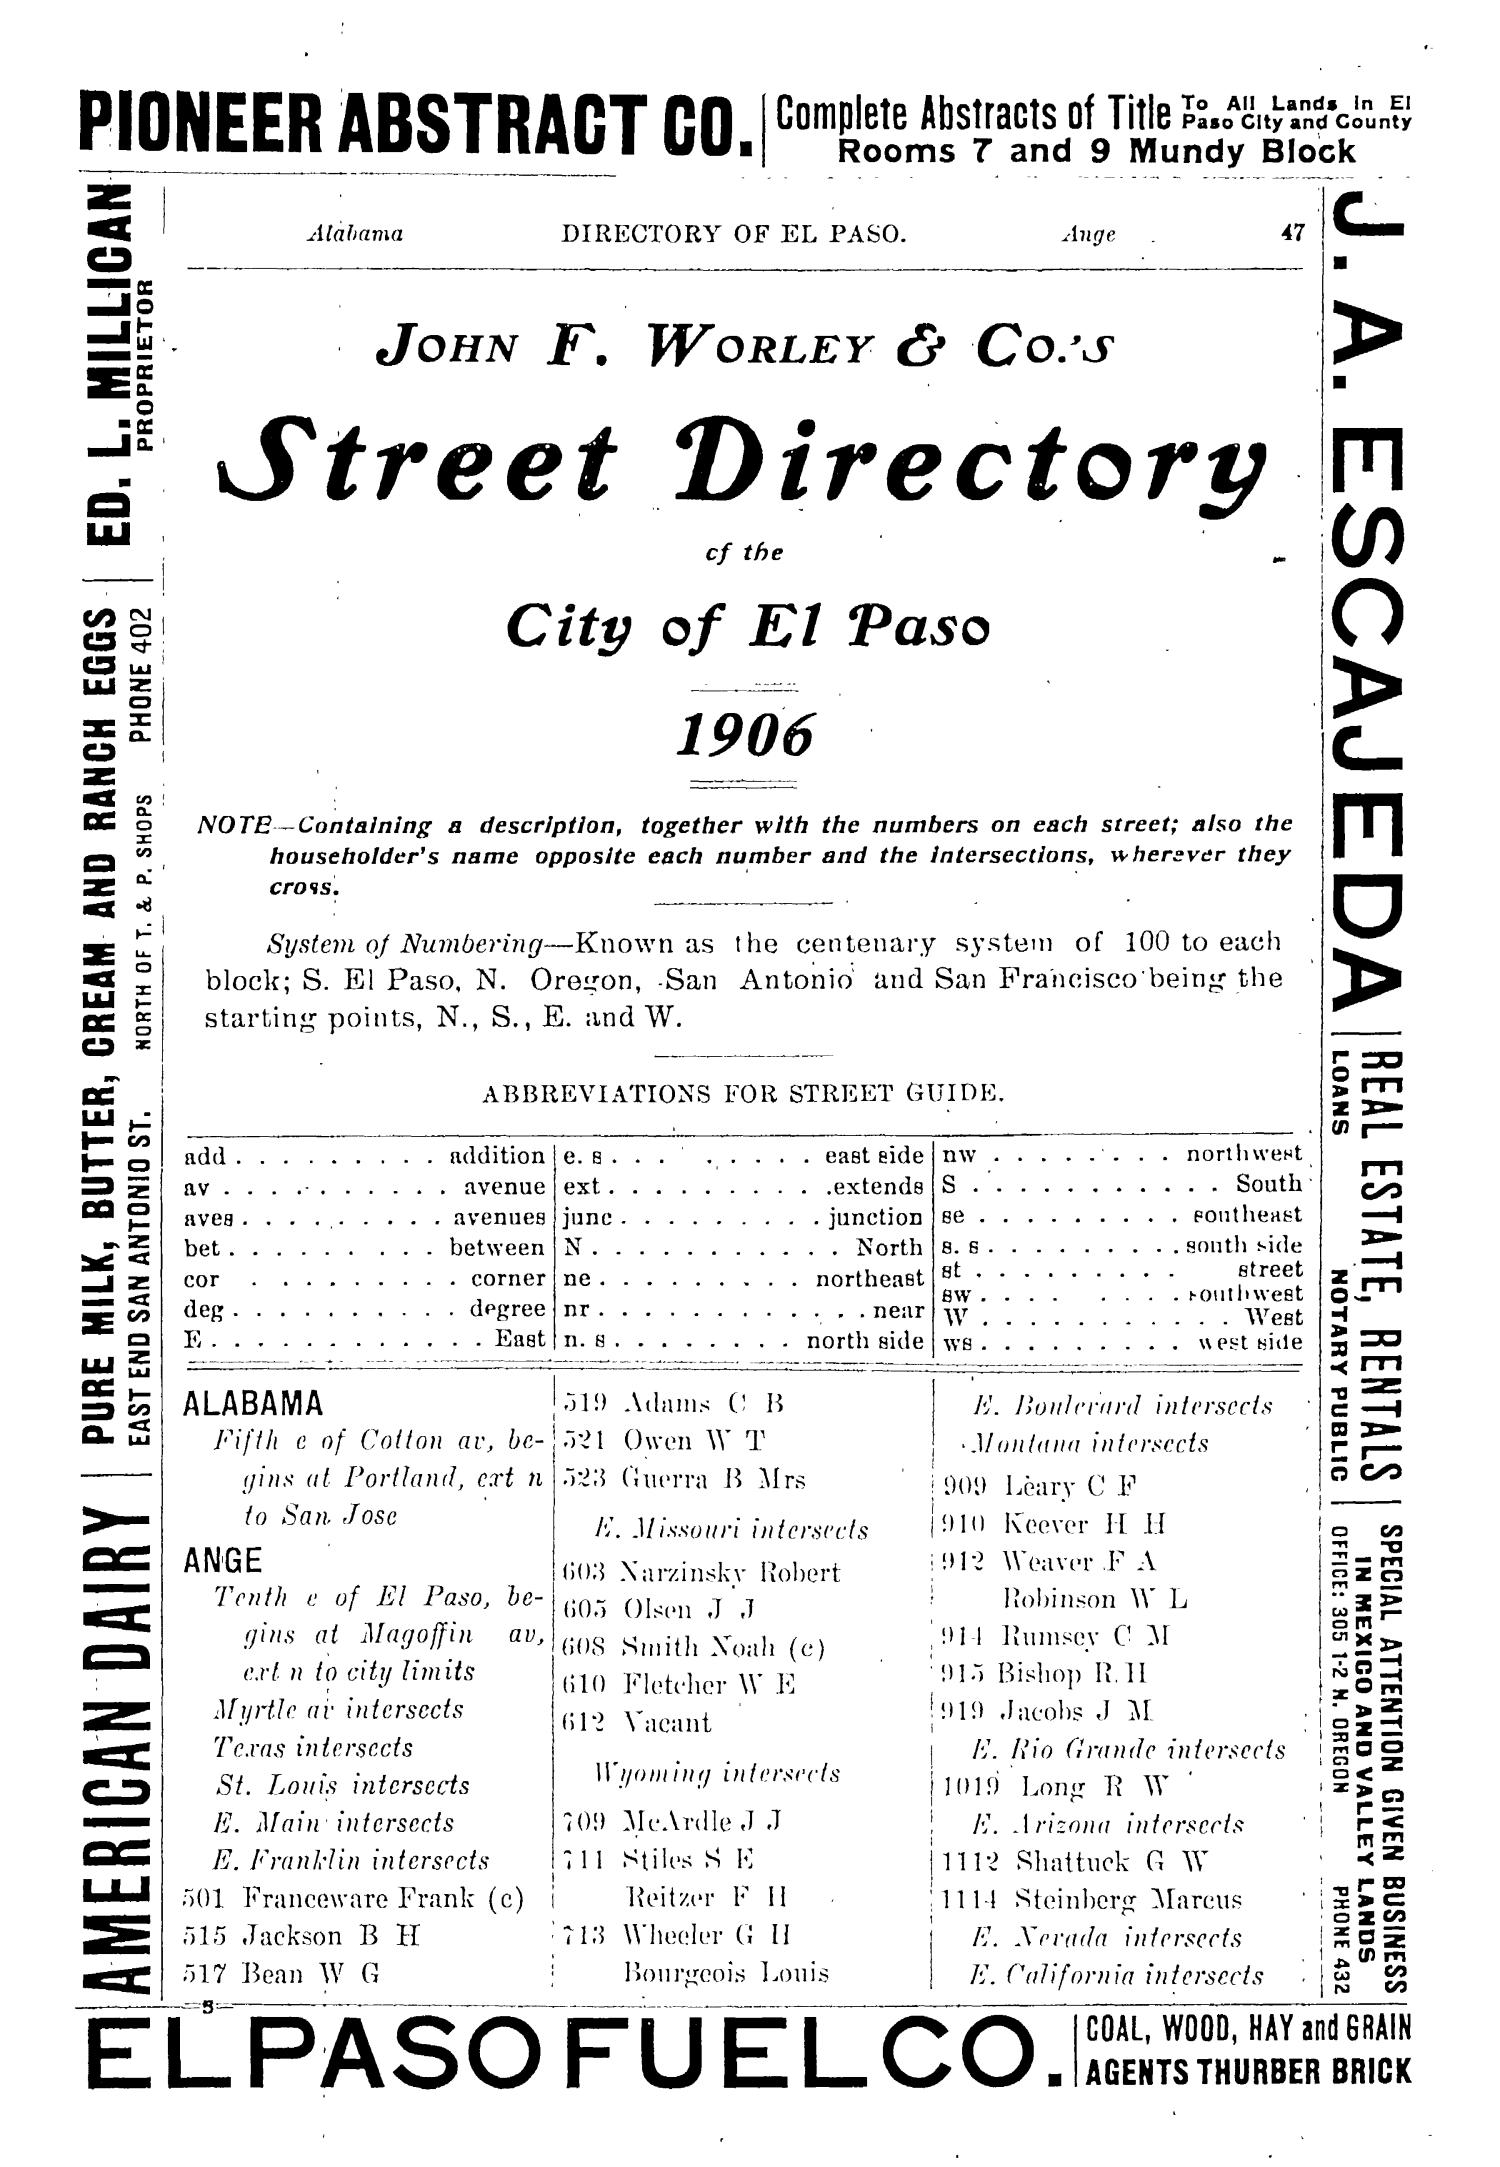 John F. Worley & Co.'s El Paso Directory for 1906
                                                
                                                    47
                                                